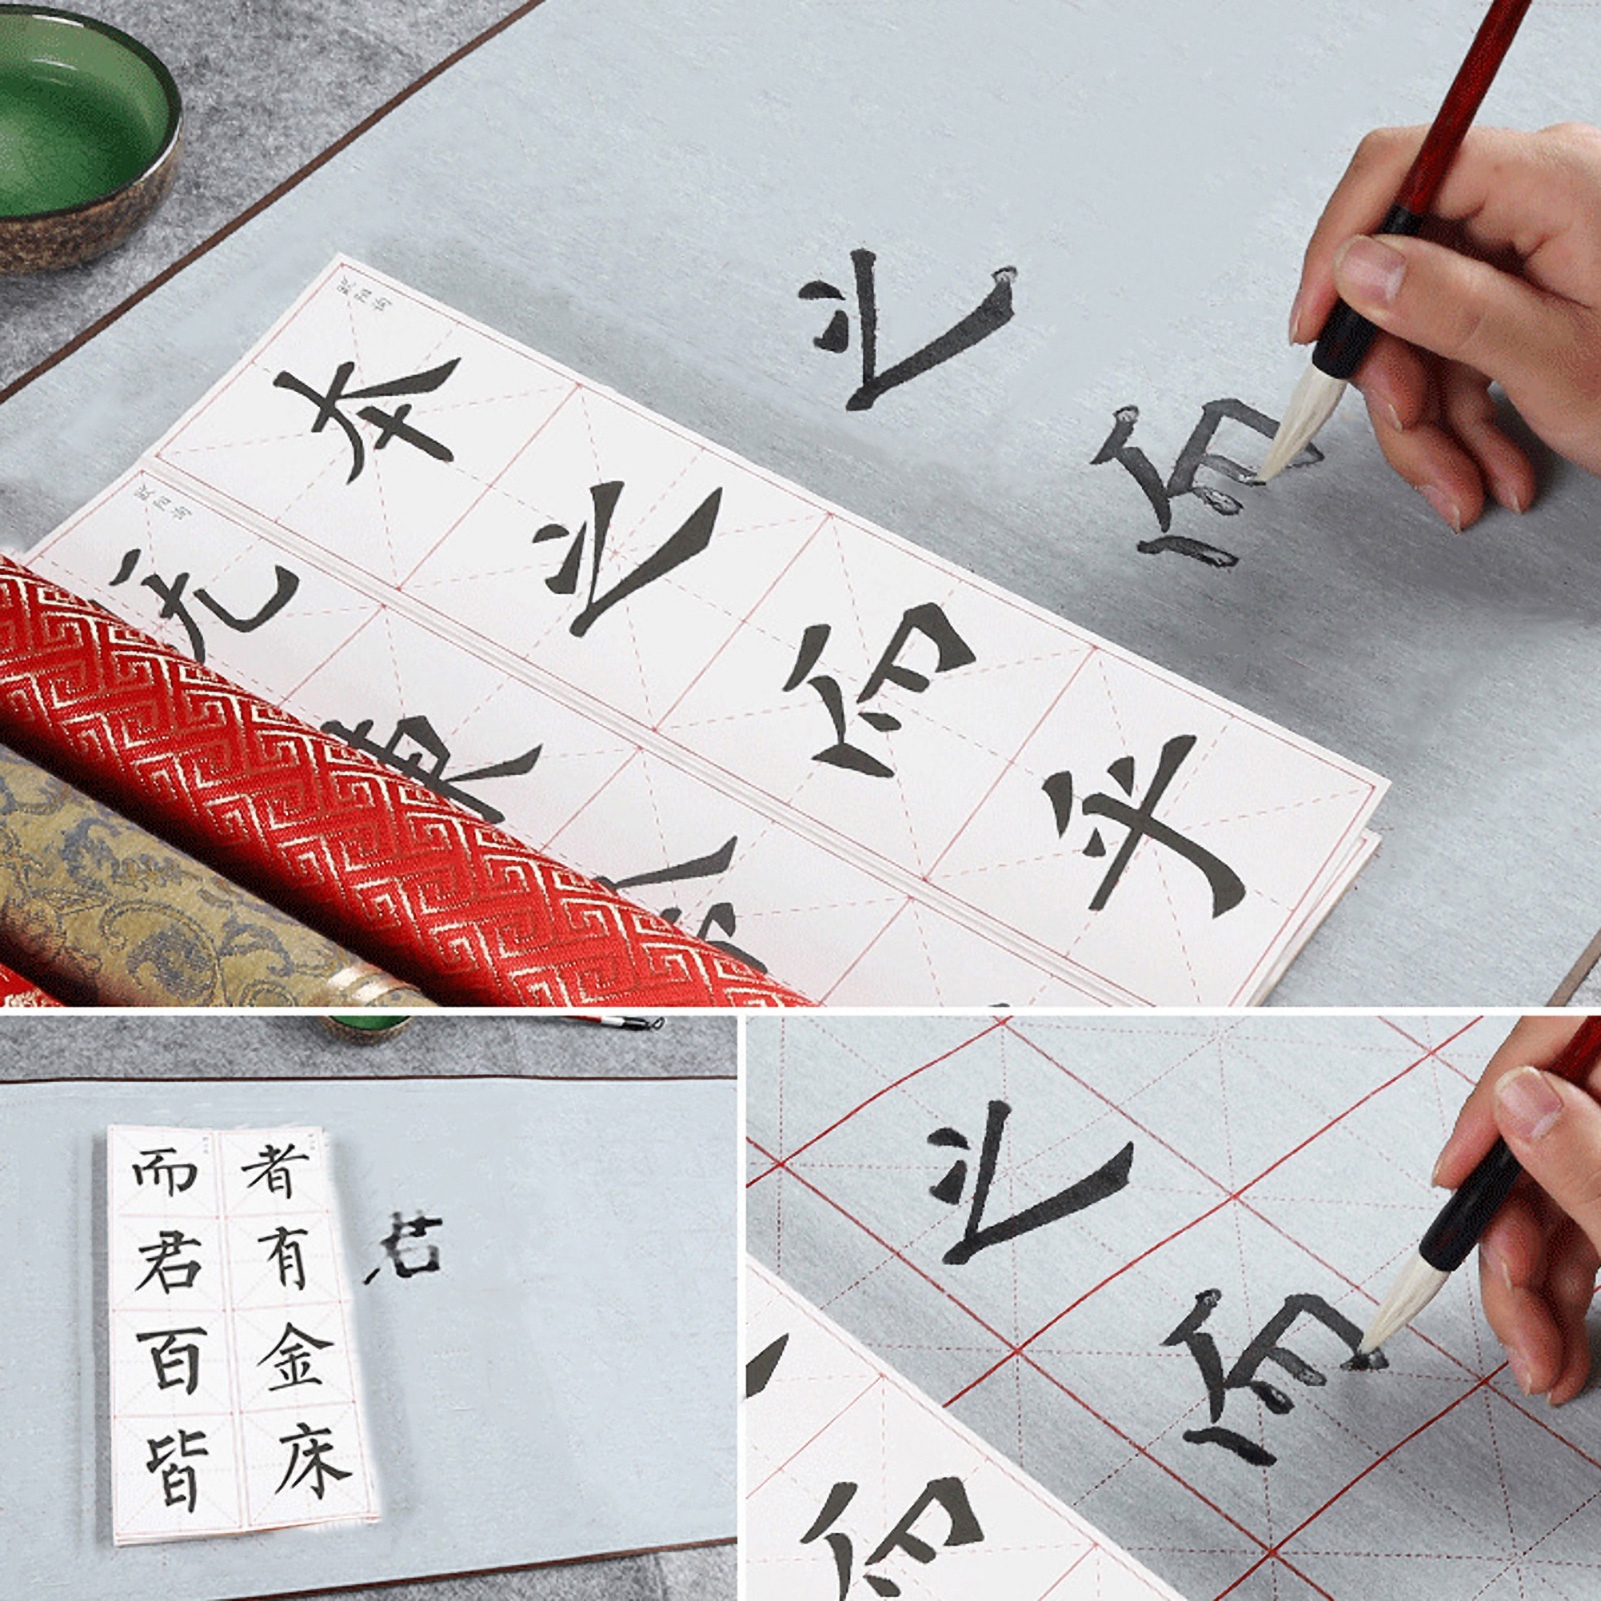 Water Writing Cloth, Chinese Magic Cloth Water Paper, Reusable Chinese  Calligraphy Practicing Tool Student Stationery for Home School, No ink 